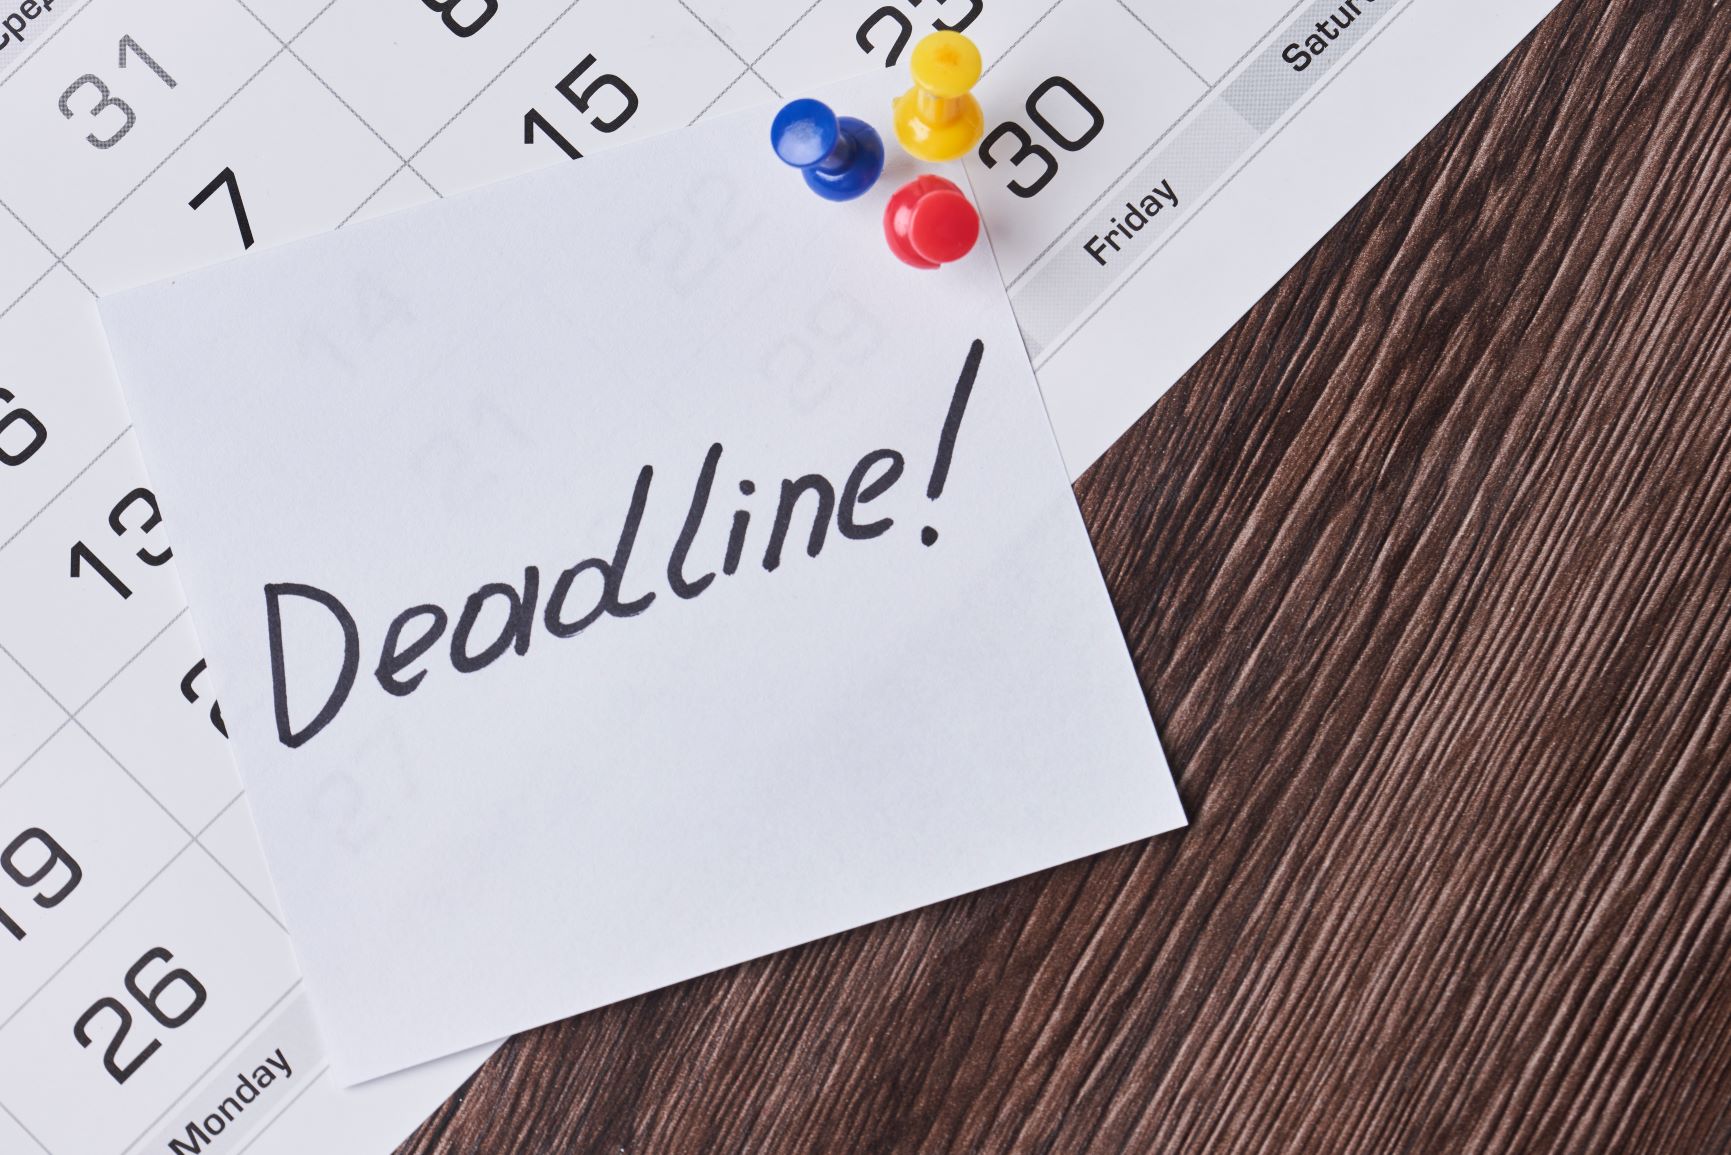 What is a deadline? 'Say no' to late employee deadlines